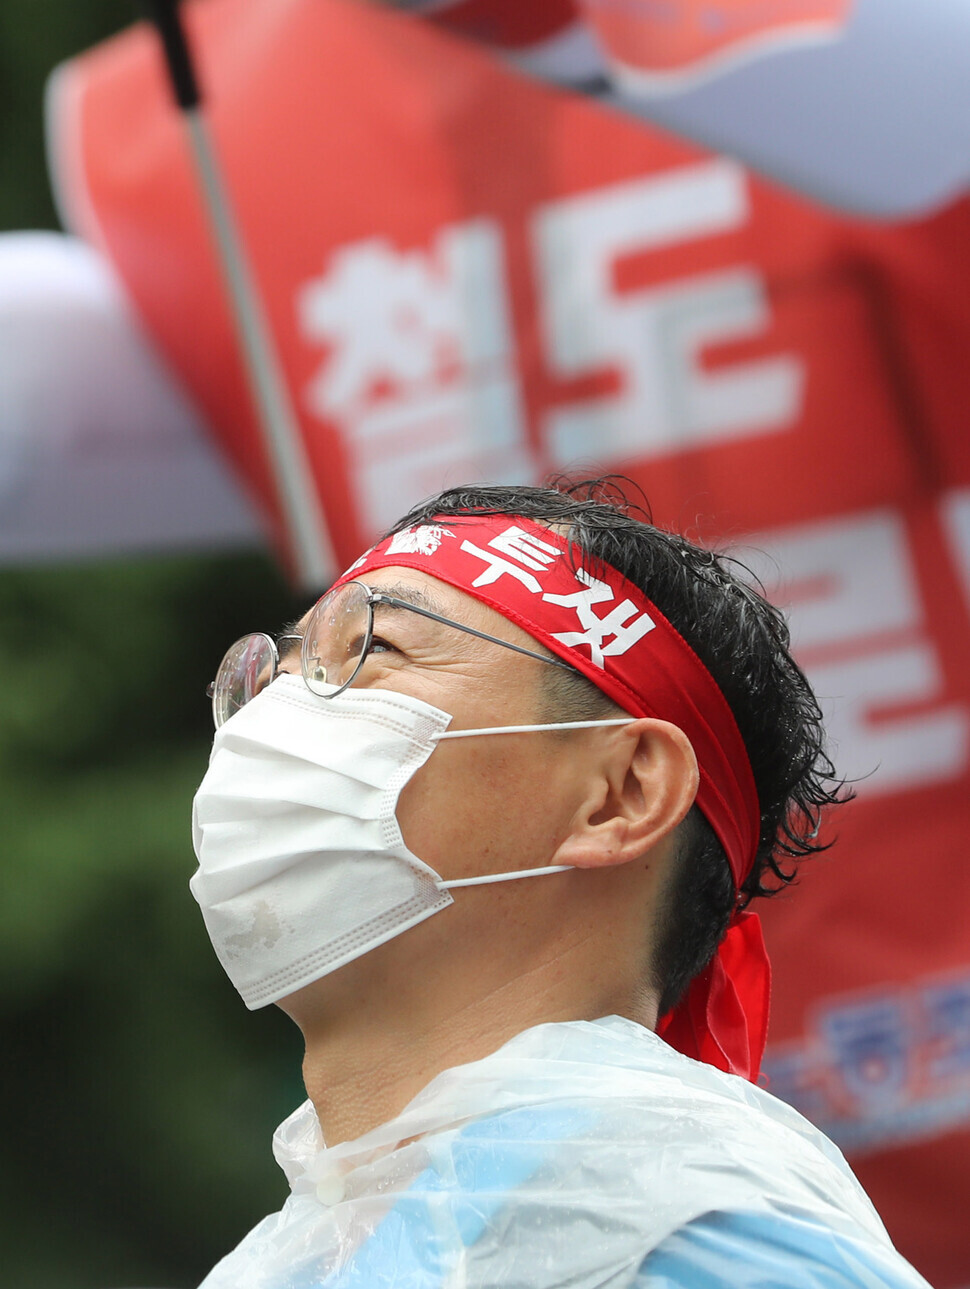 A member of the KRWU present at the march wears a red headband on which the word “struggle” is printed. (Shin So-young/The Hankyoreh)